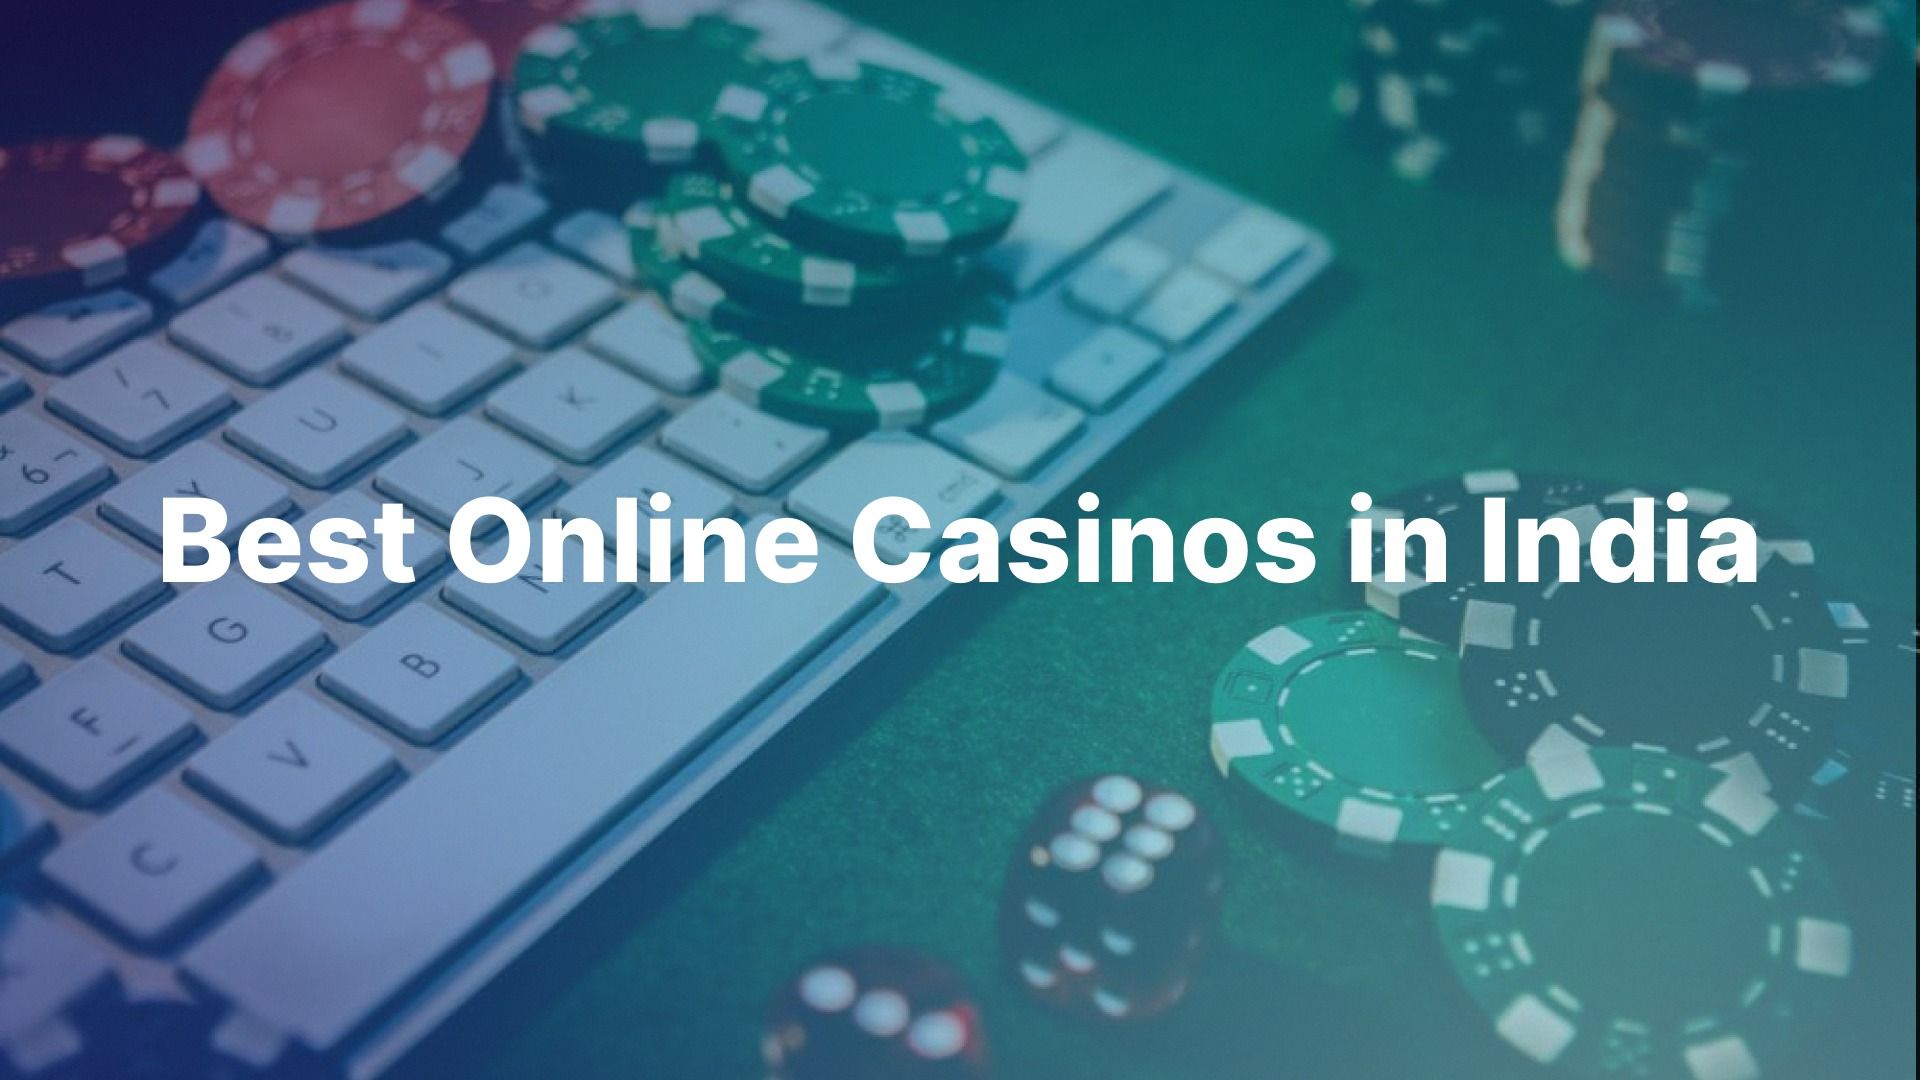 The Best Way To Understanding why Indian online casinos are enticing players from around the world.